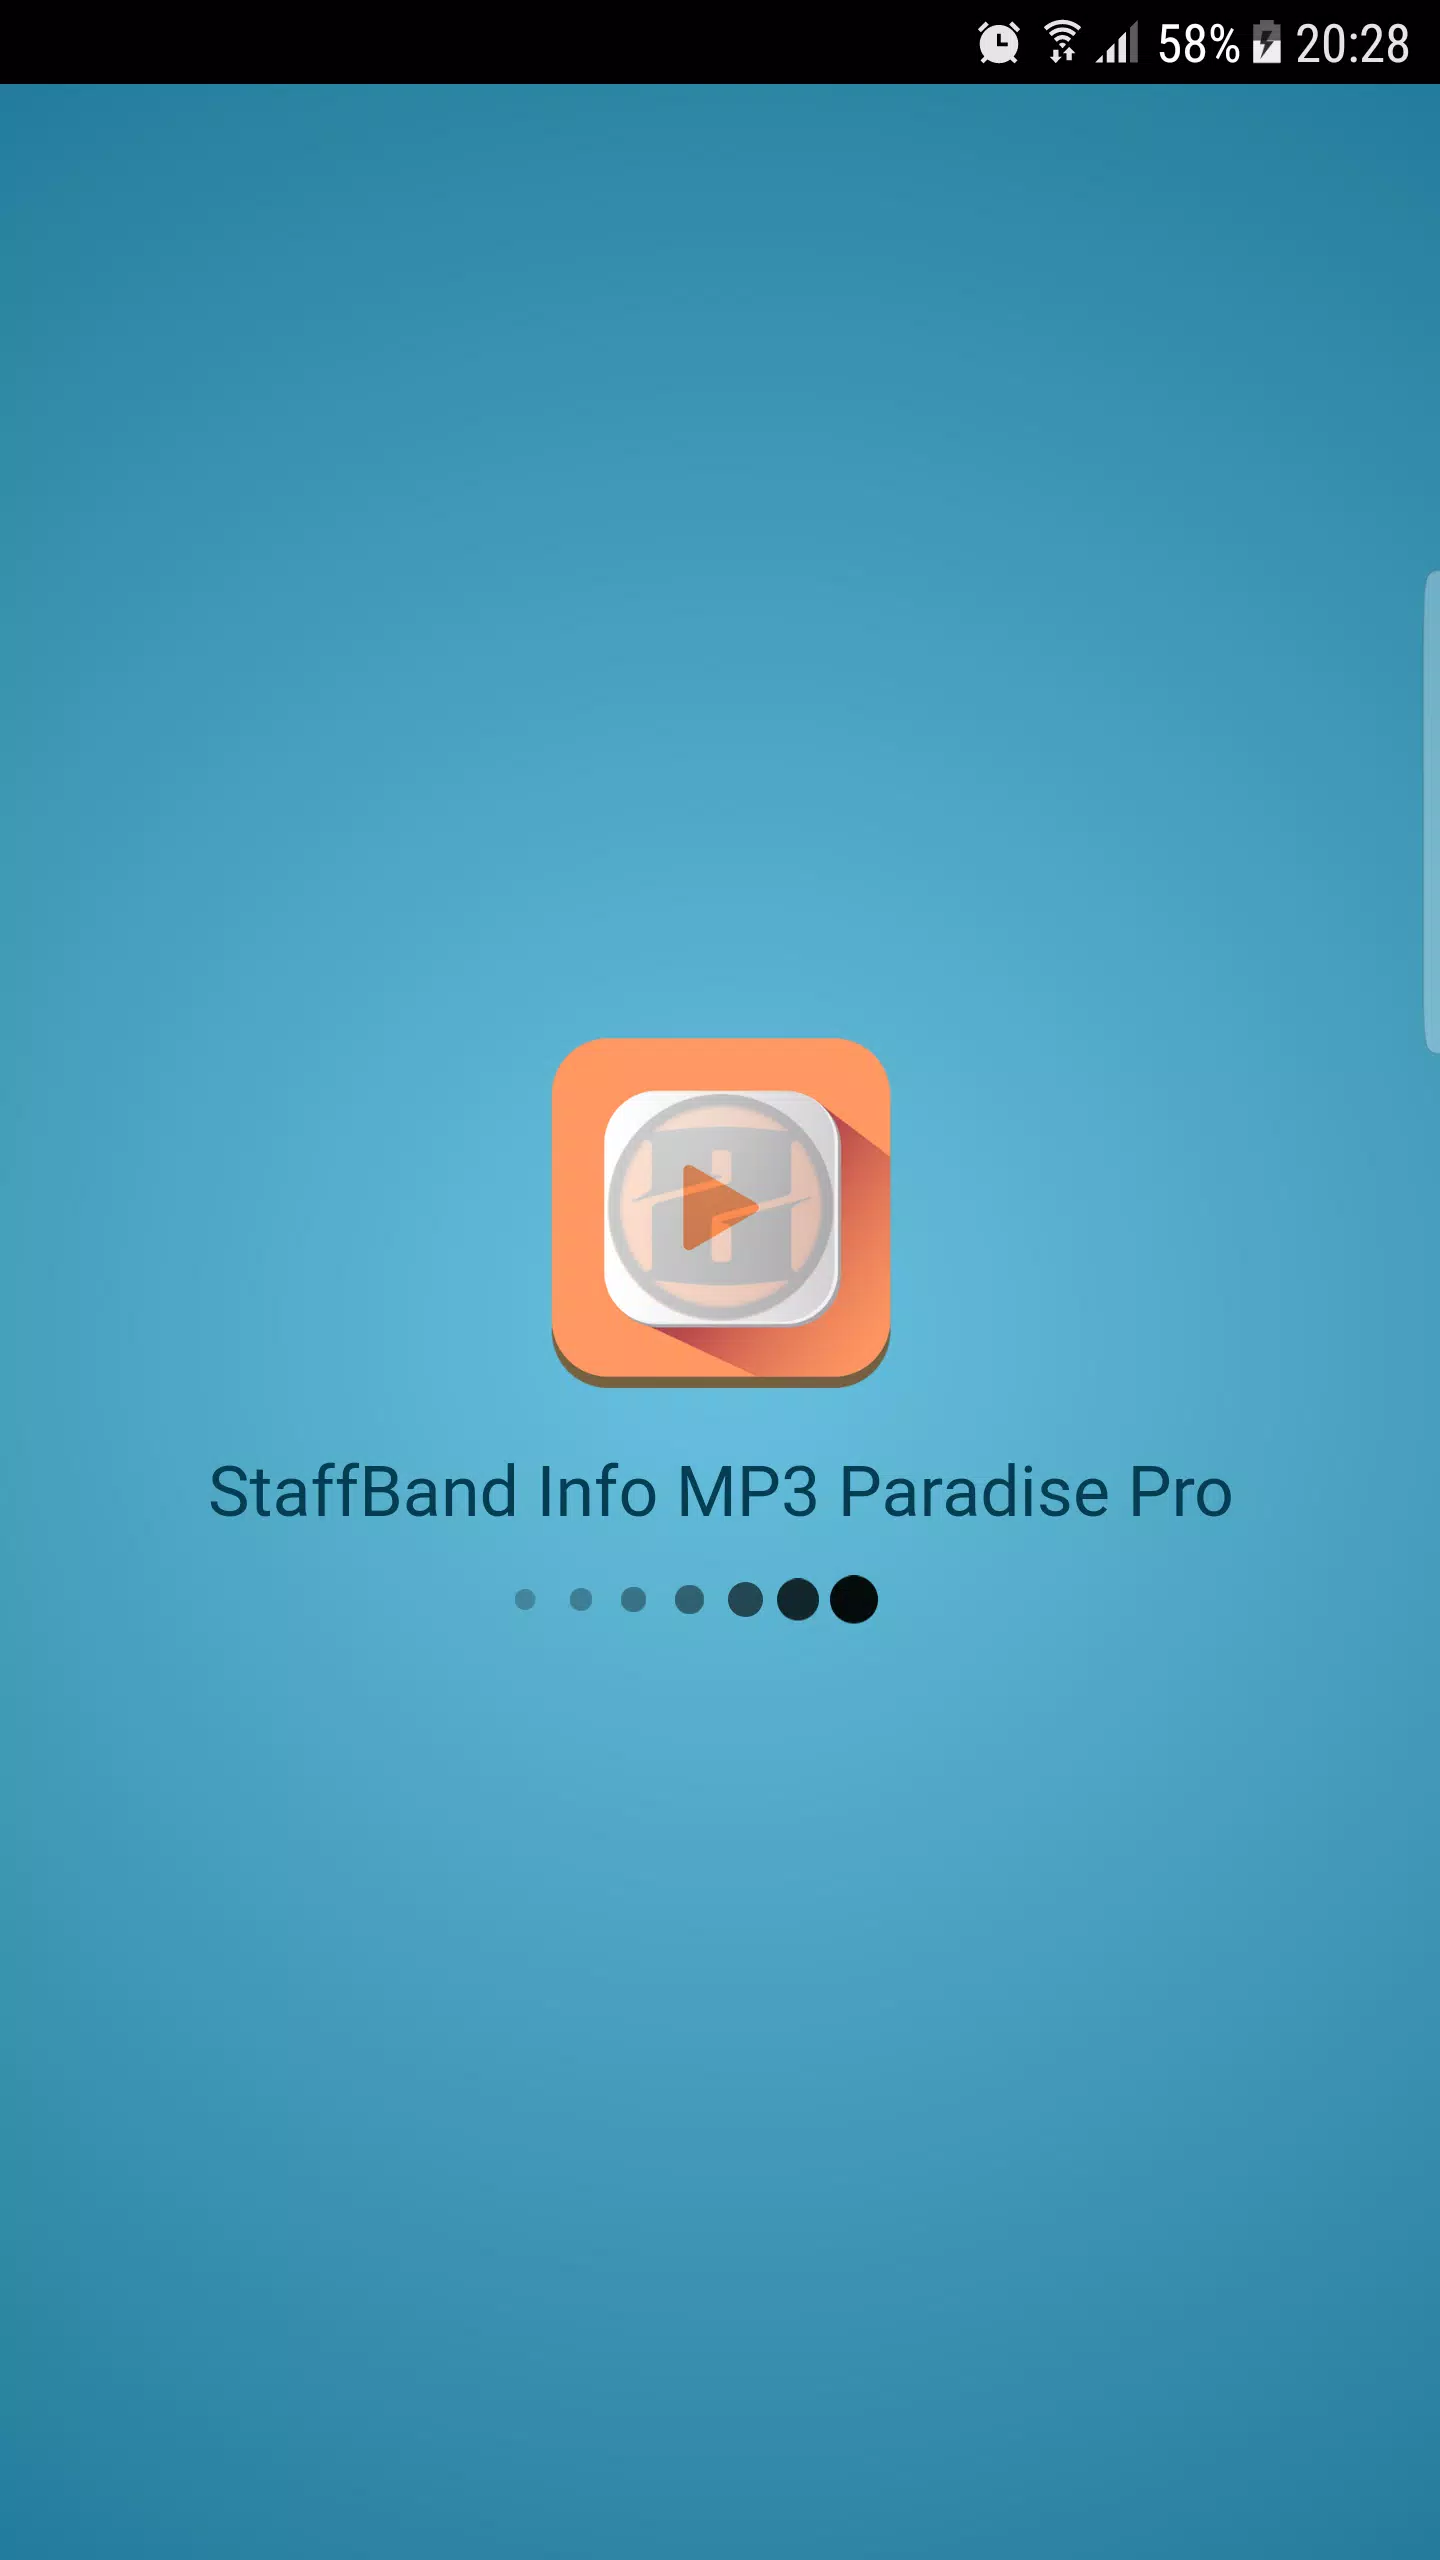 StafaBand Free MP3 Music Download Player for Android - APK Download